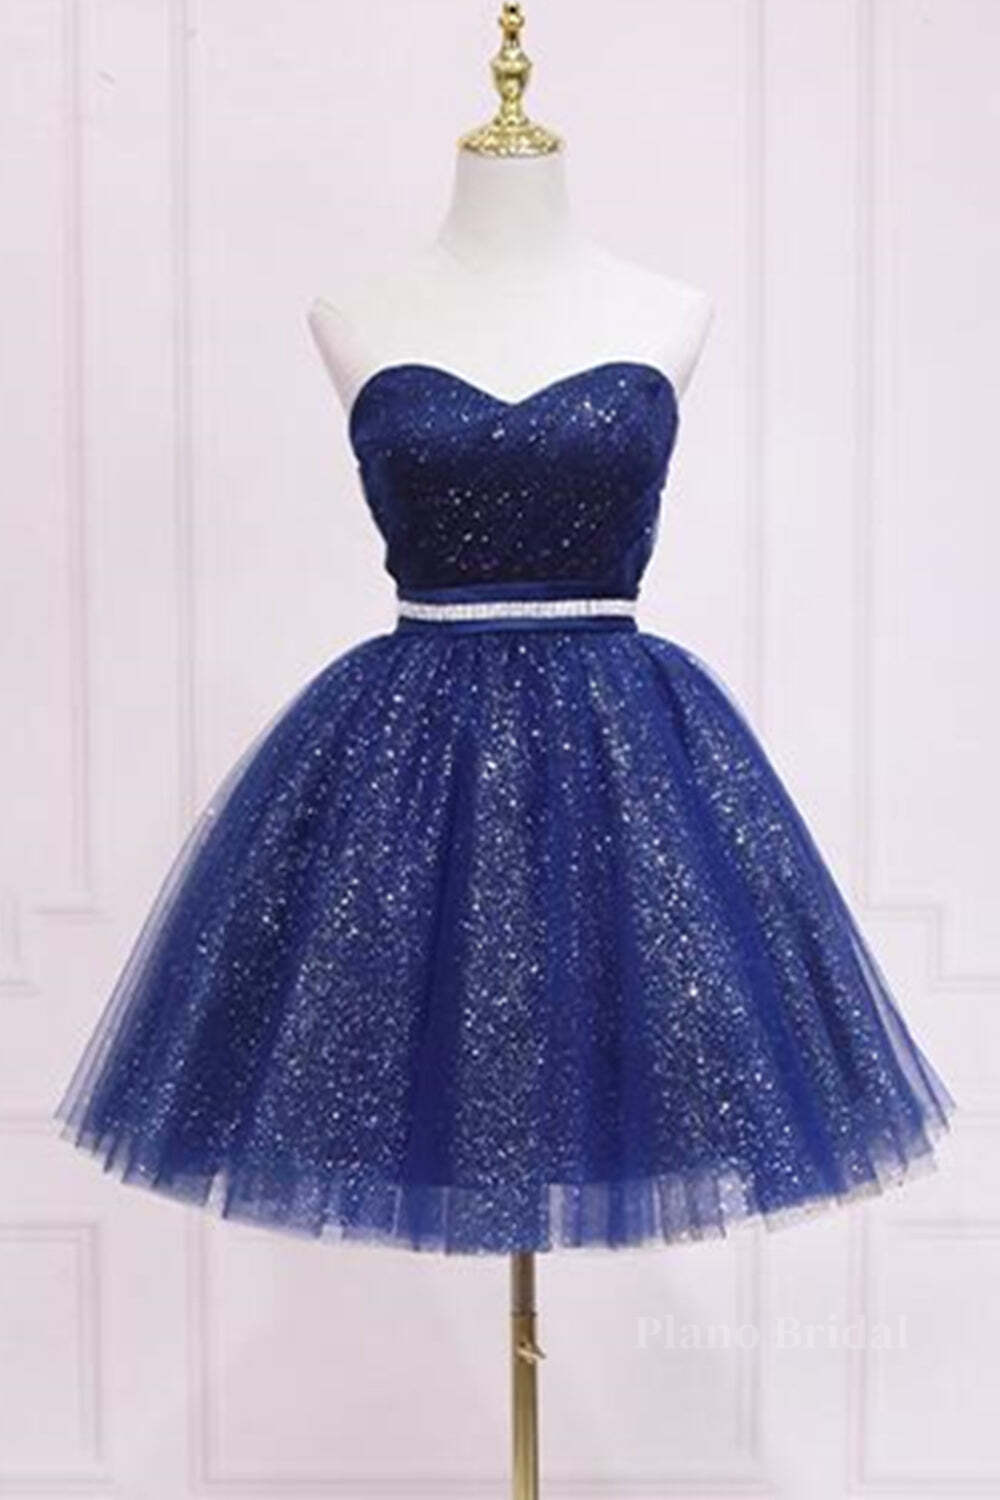 Shiny Strapless Sweetheart Neck Blue Short Prom Homecoming Dress with Belt, Sparkly Blue Formal Evening Dress